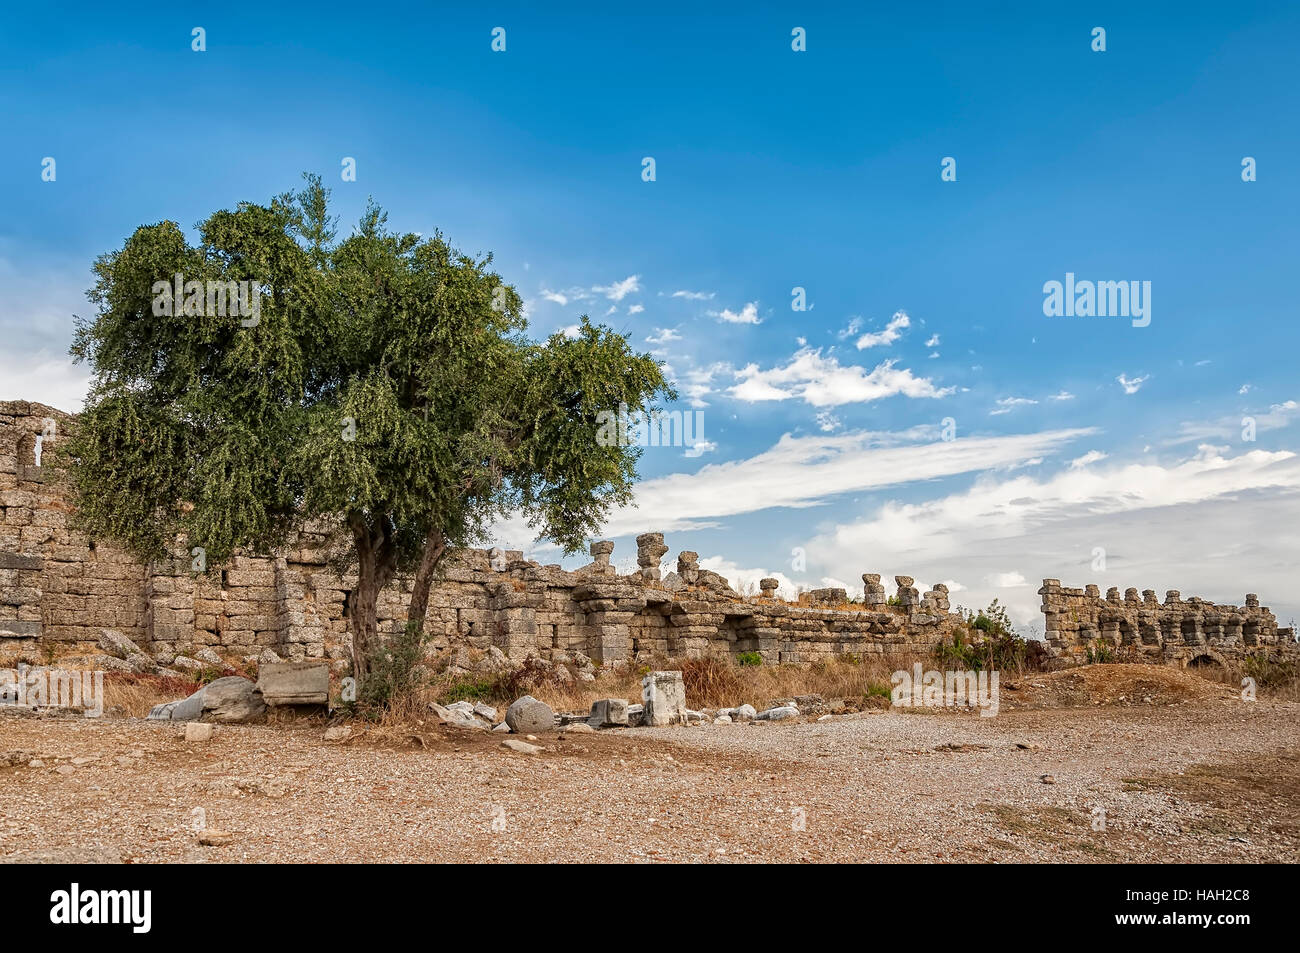 Part of the ancient city wall ruins that surround the town of Side in Turkey. Stock Photo